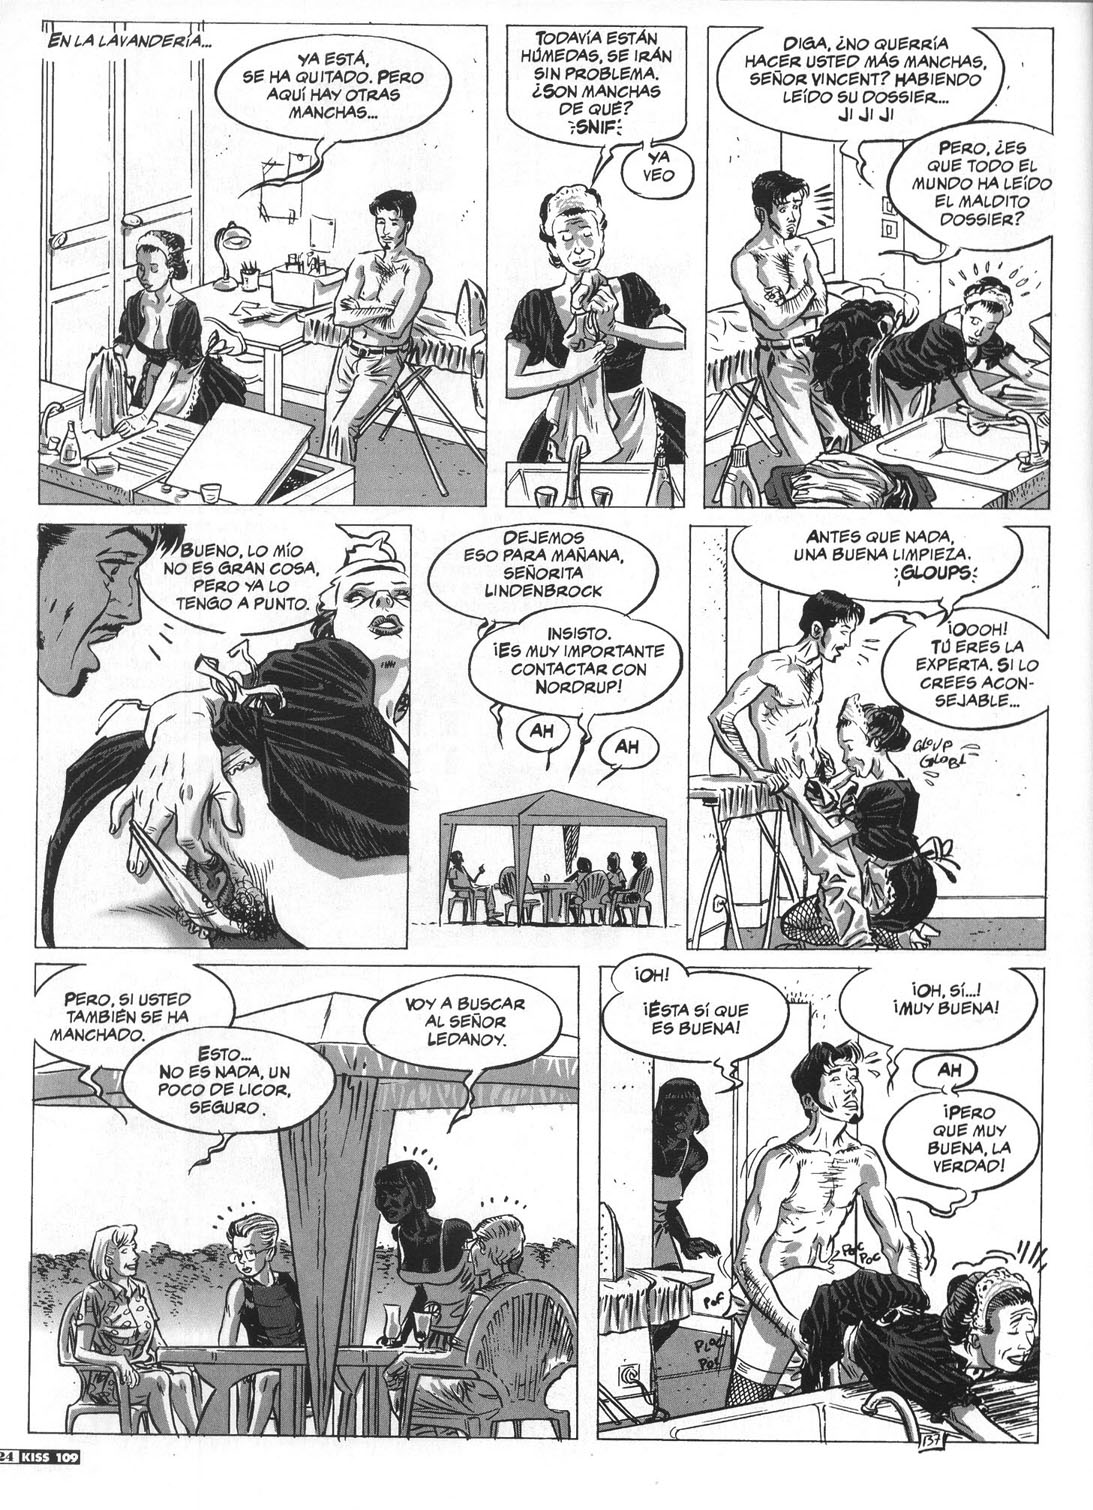 Kiss Comix 109 image number 23